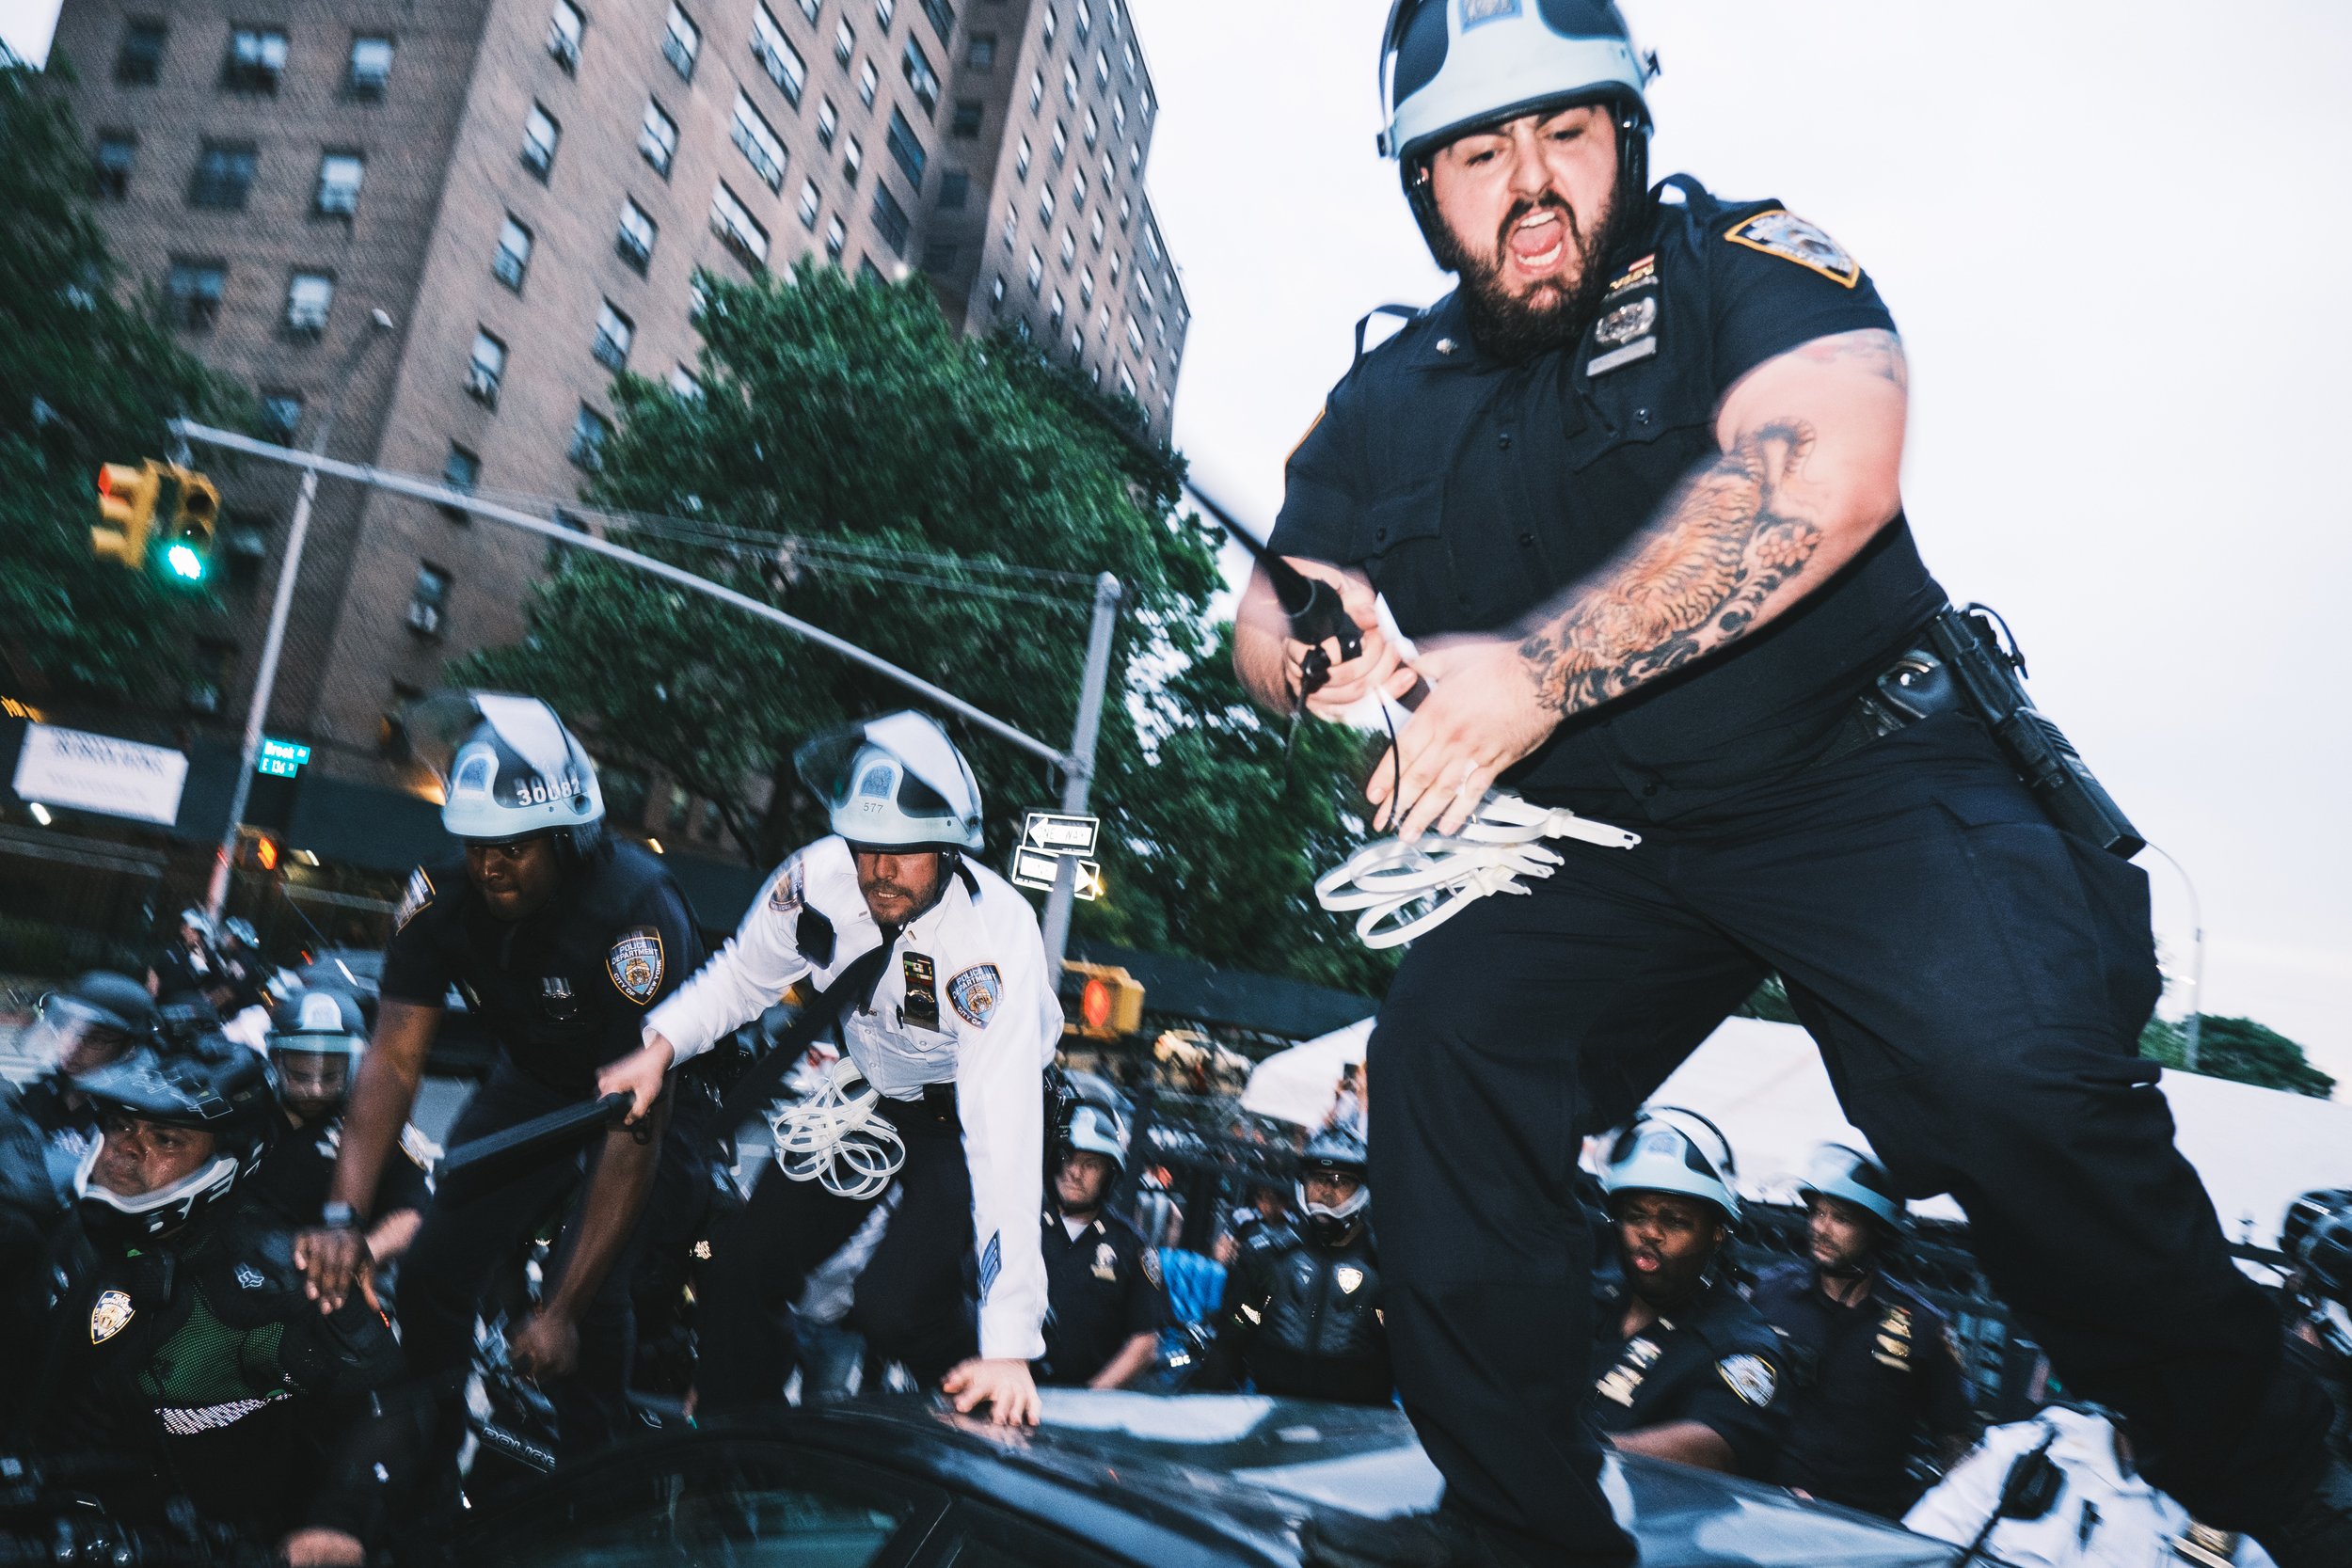  Members of the NYPD use a technique called “kettling” at a protest in the Bronx on Jun 4th, 2020 during widespread civil unrest after the death of George Floyd in Minneapolis Police custody.  